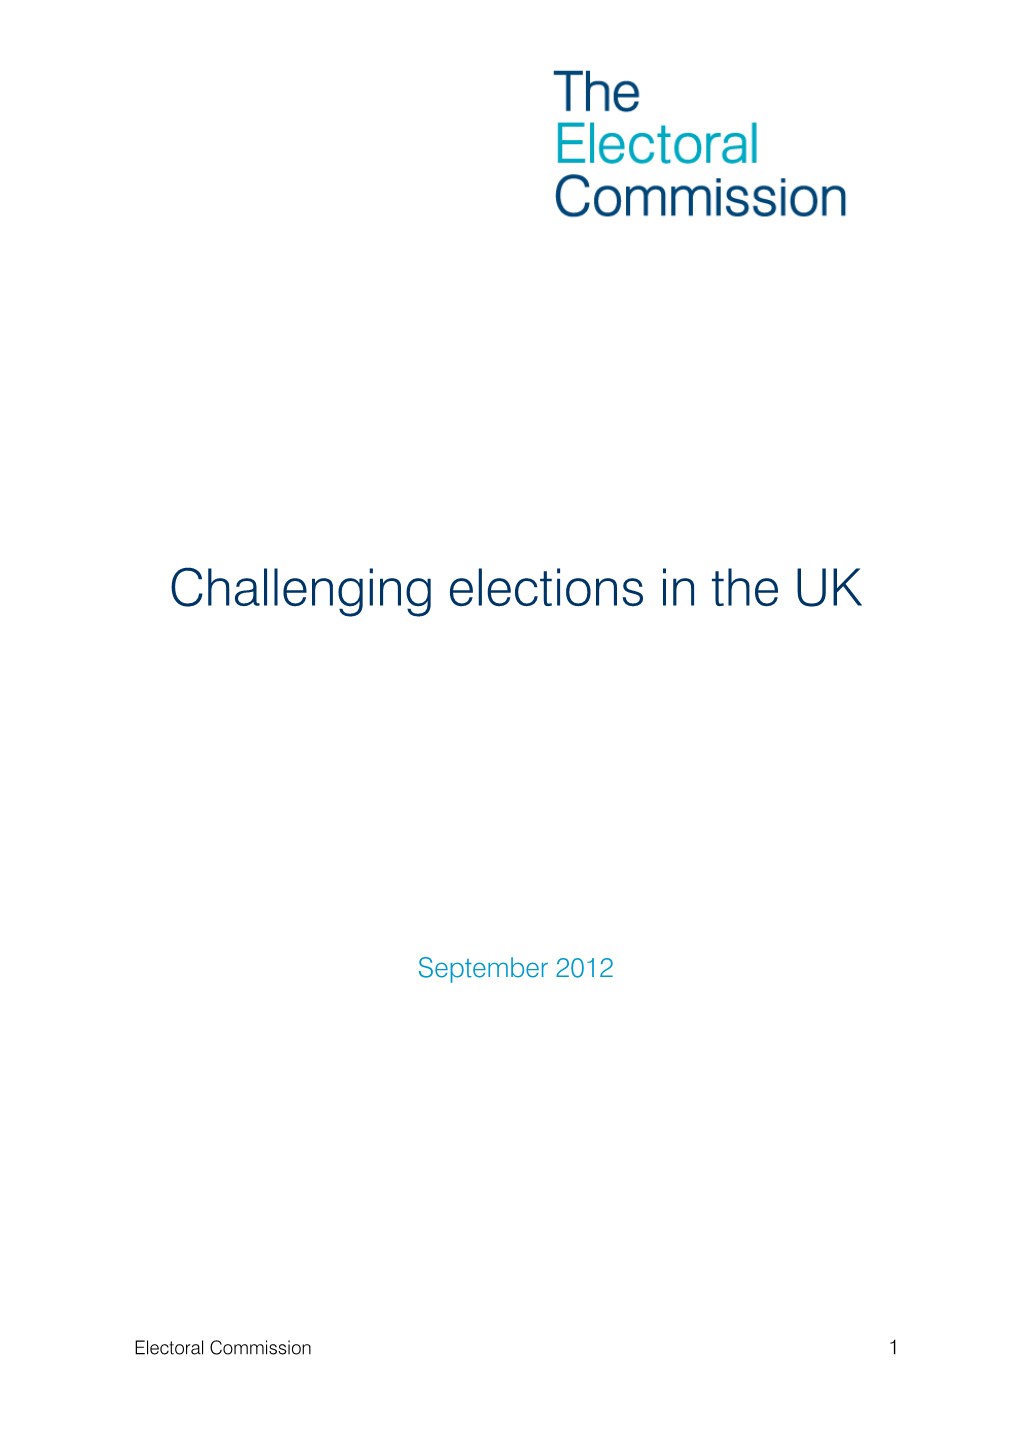 Challenging Elections in the UK